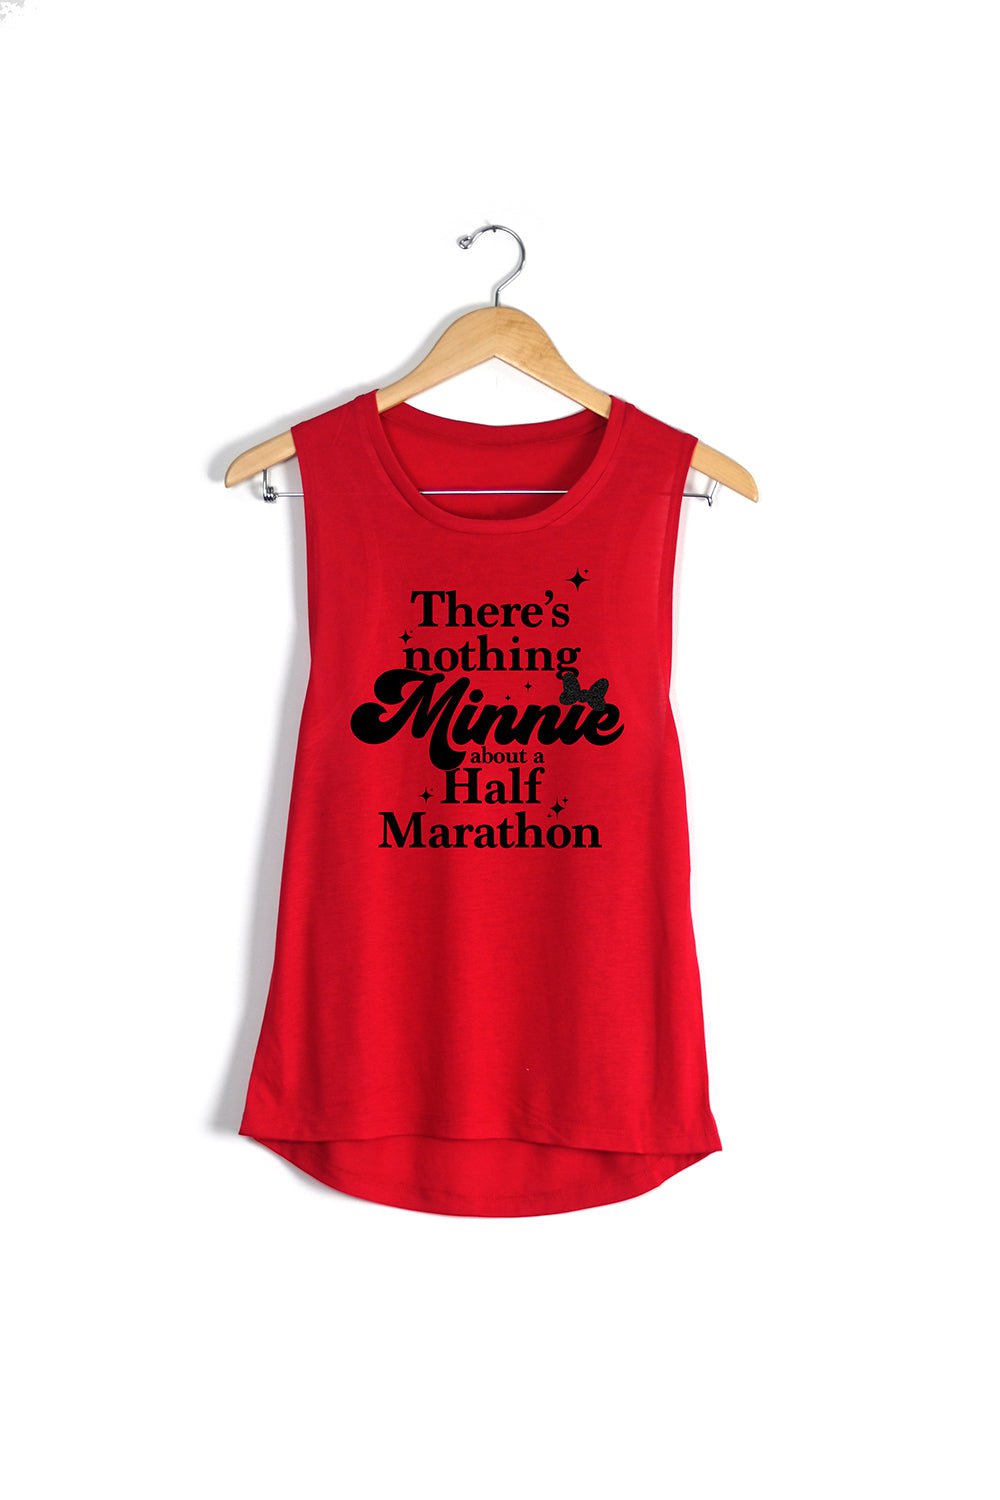 Sarah Marie Design Studio Women's Tank Small / Red There's nothing Minnie about a Half Marathon Disney Inspired Tank